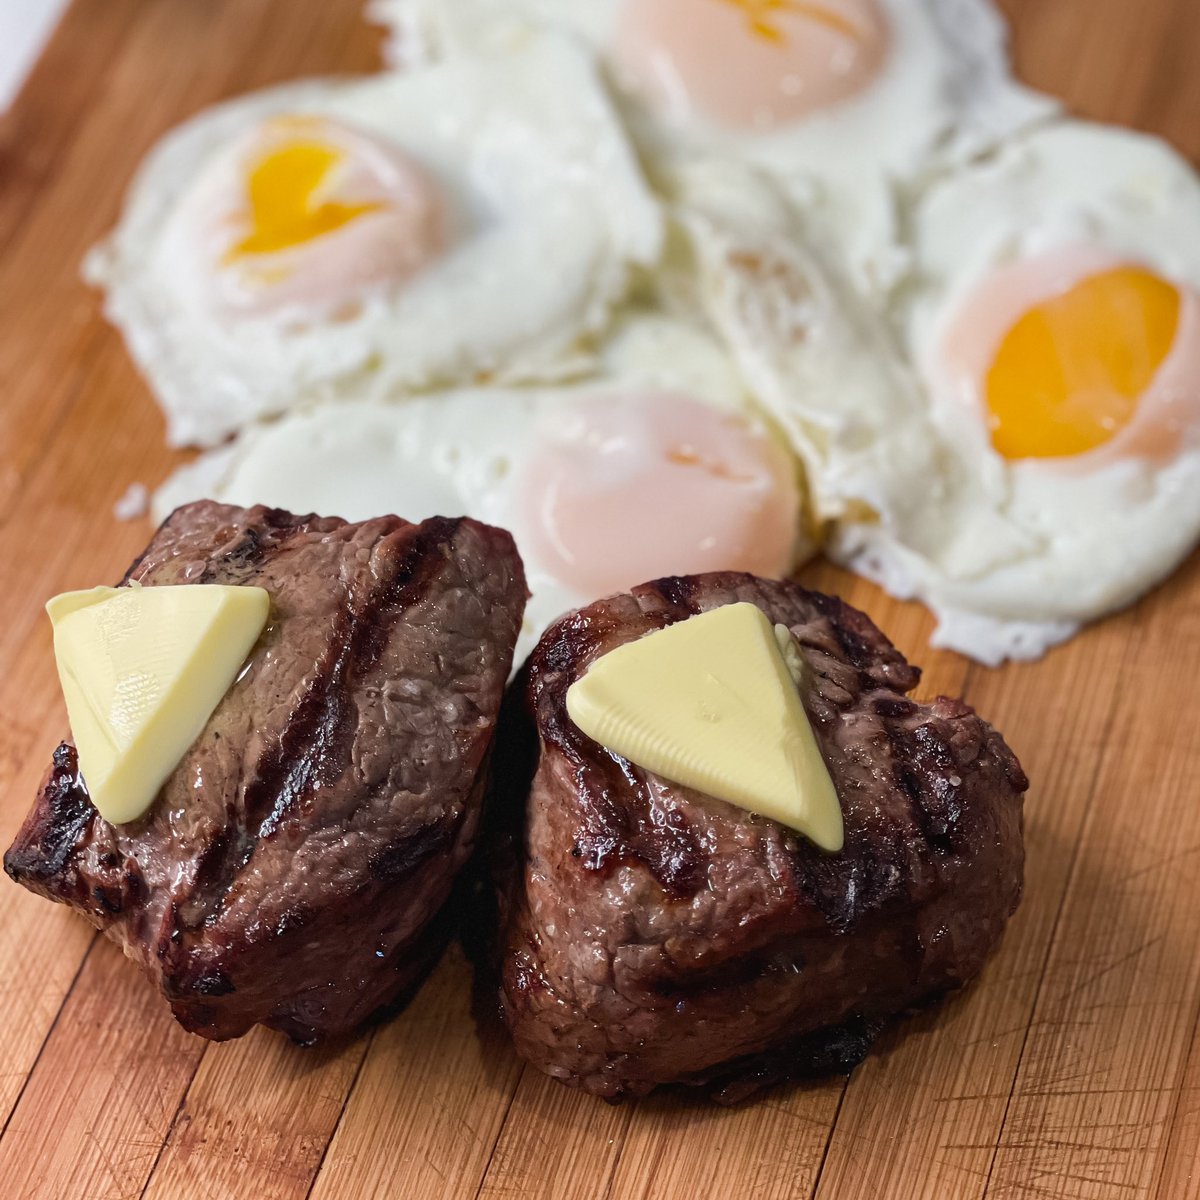 MEDicine
(Meat 🥩 Eggs 🍳 Diary 🧈)

It’s hard to believe that calling these three food sources healthy (all have been part of the human diet for eons), triggers people into cognitive dissonance 😂

#keto #carnivore #steak #eggs #highprotein #nocarb #ketosis #fasting